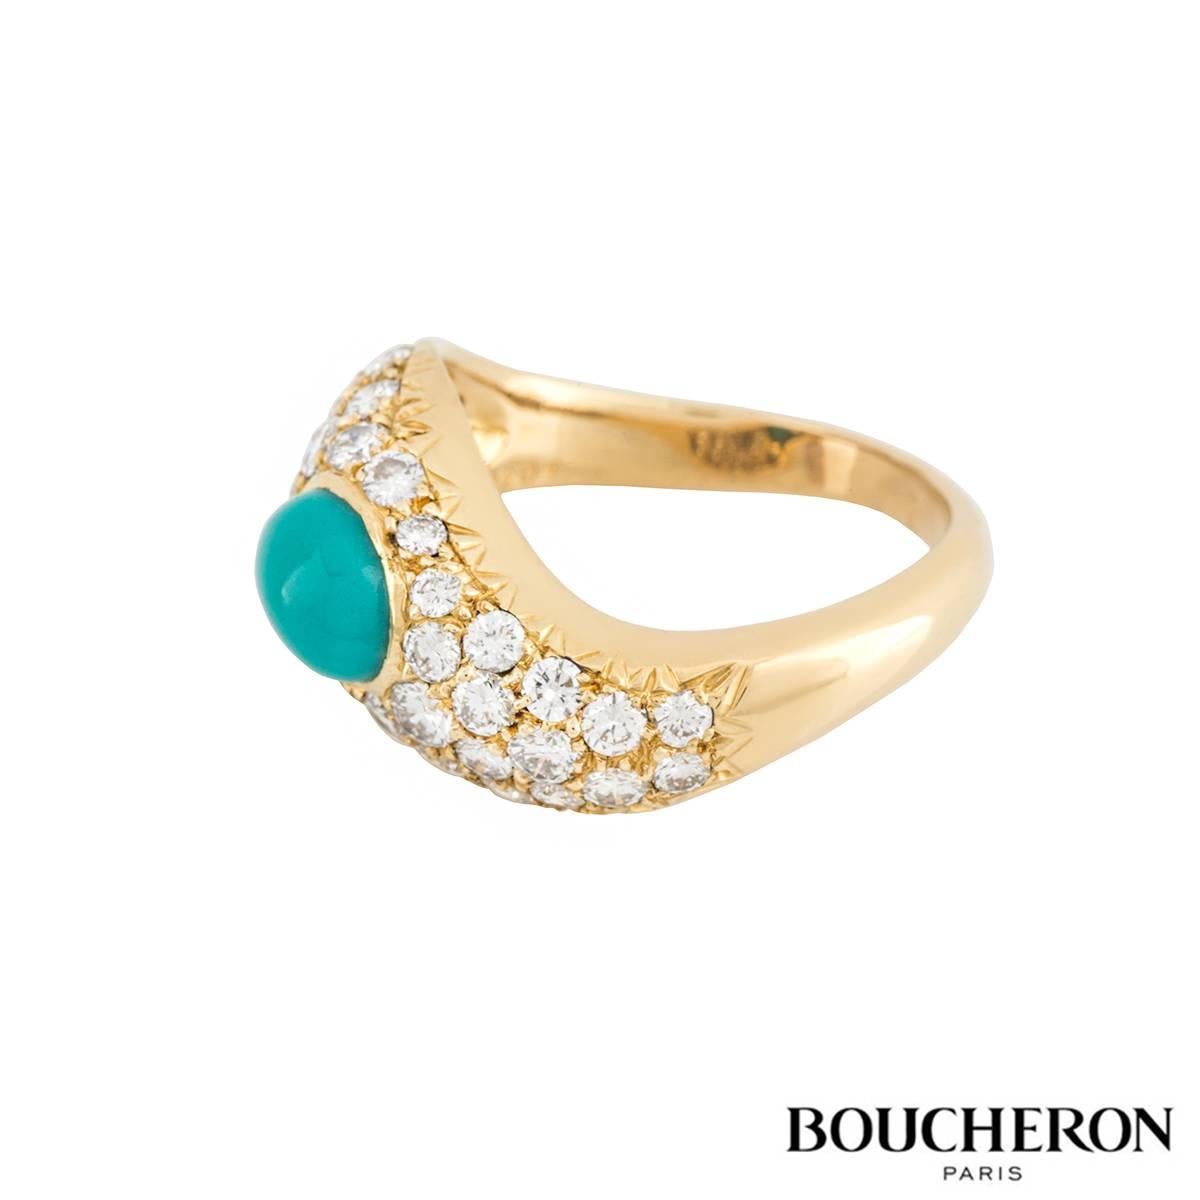 An 18k yellow gold dress ring by Boucheron. The ring is in the style of a wave comprising of a single oval cabochon cut turquoise stone, surrounded by a cluster of round brilliant cut diamonds totalling approximately 0.60ct. The ring is currently a